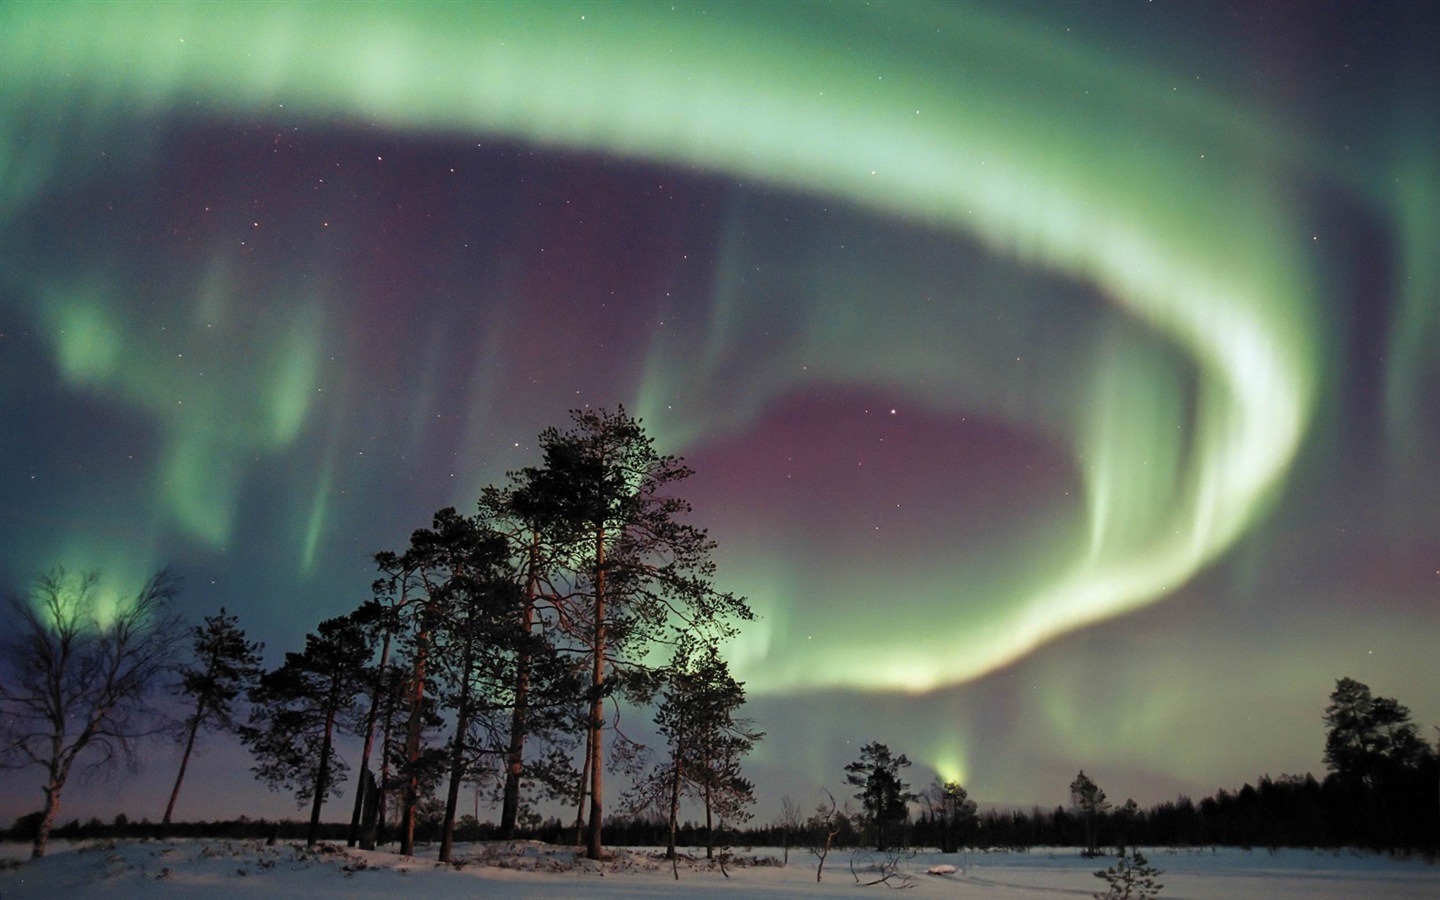 Natural wonders of the Northern Lights HD Wallpaper (2) #13 - 1440x900